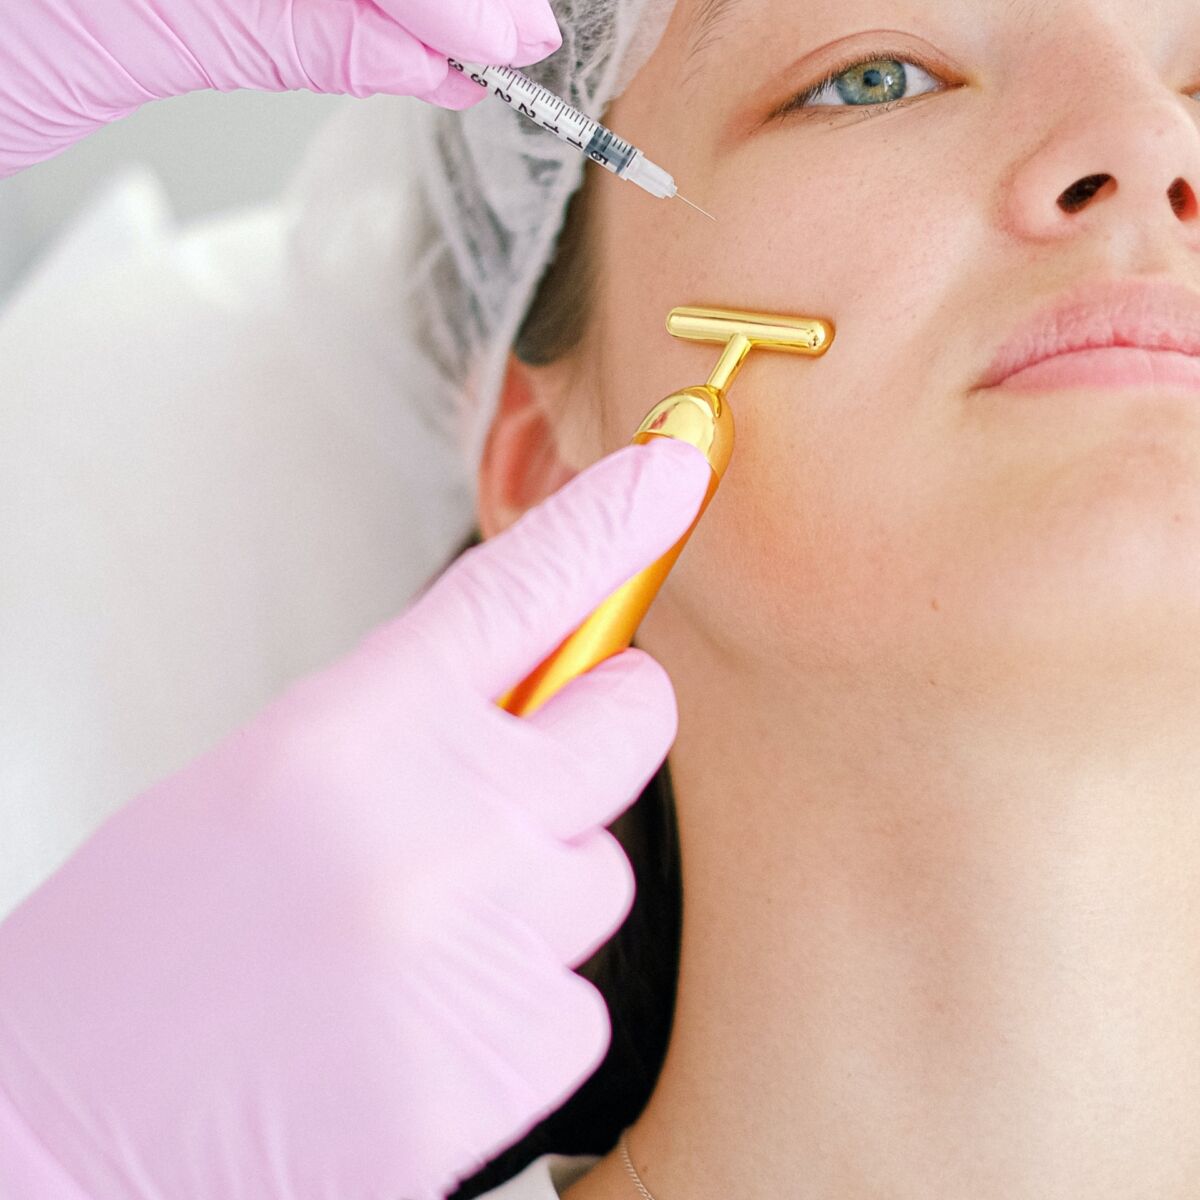 A woman's wrinkles being injected